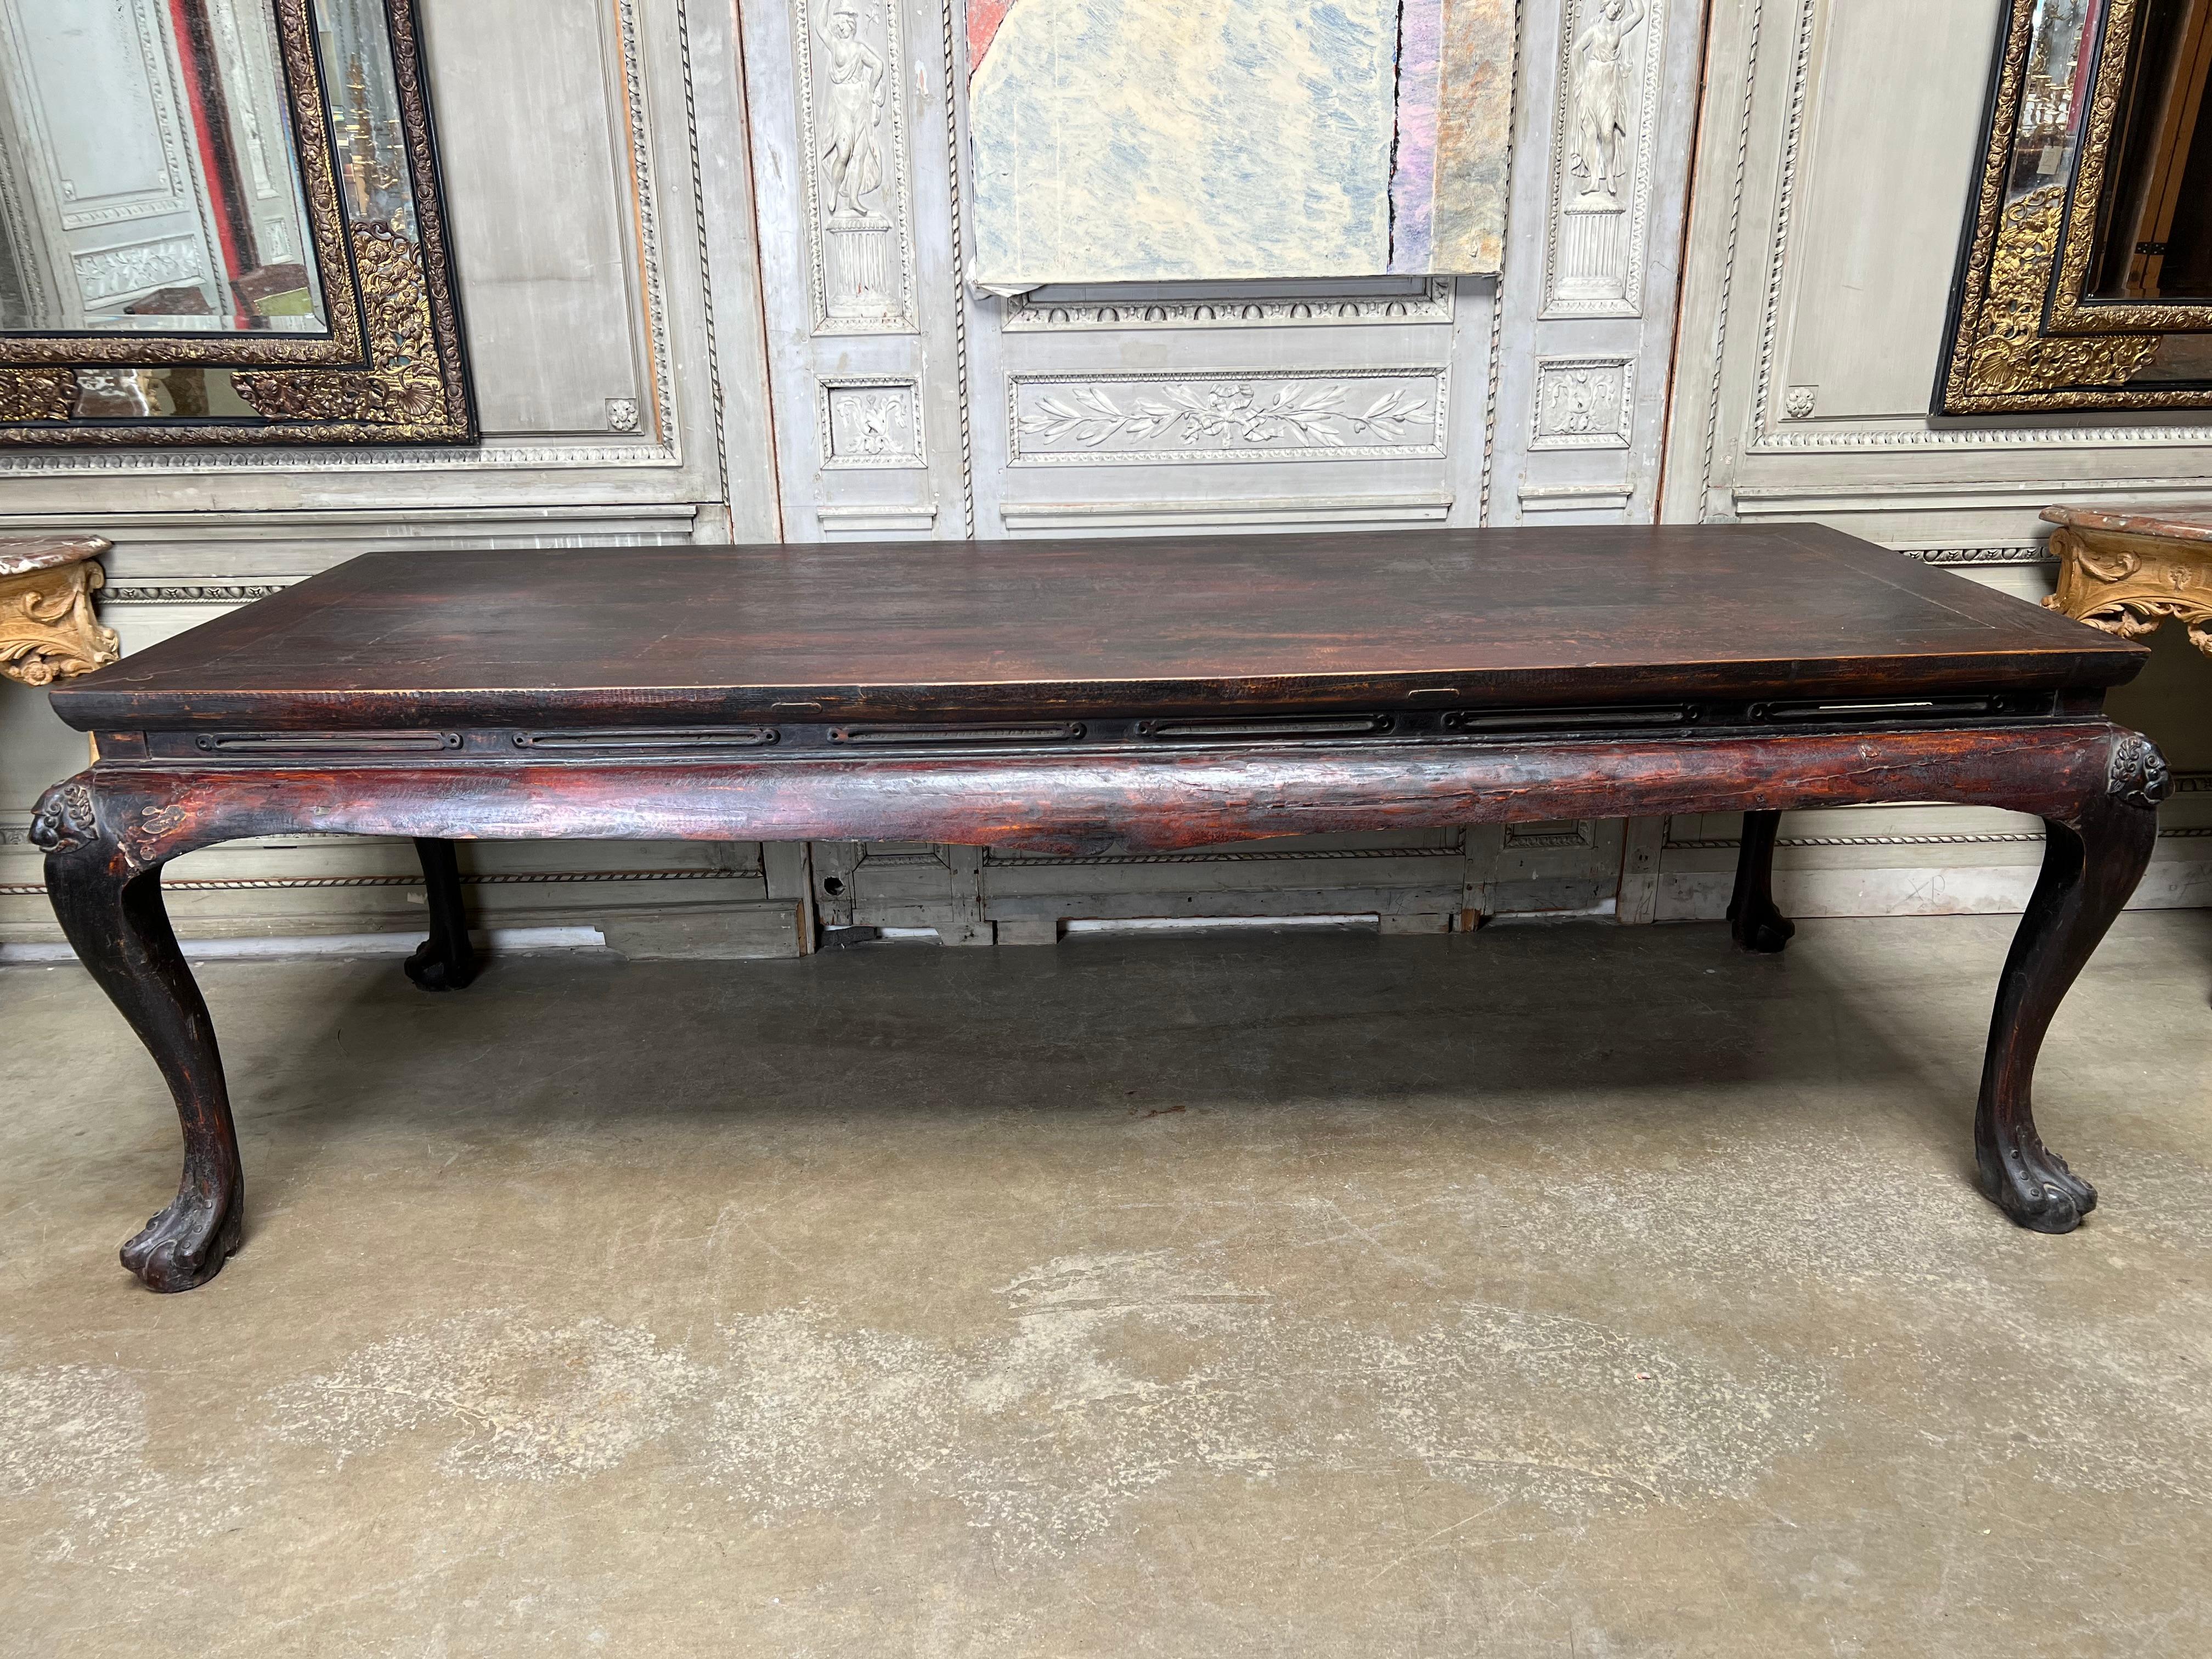 Chinoiserie Large 19th Century Elmwood Table with an Old Lacquer Finish For Sale